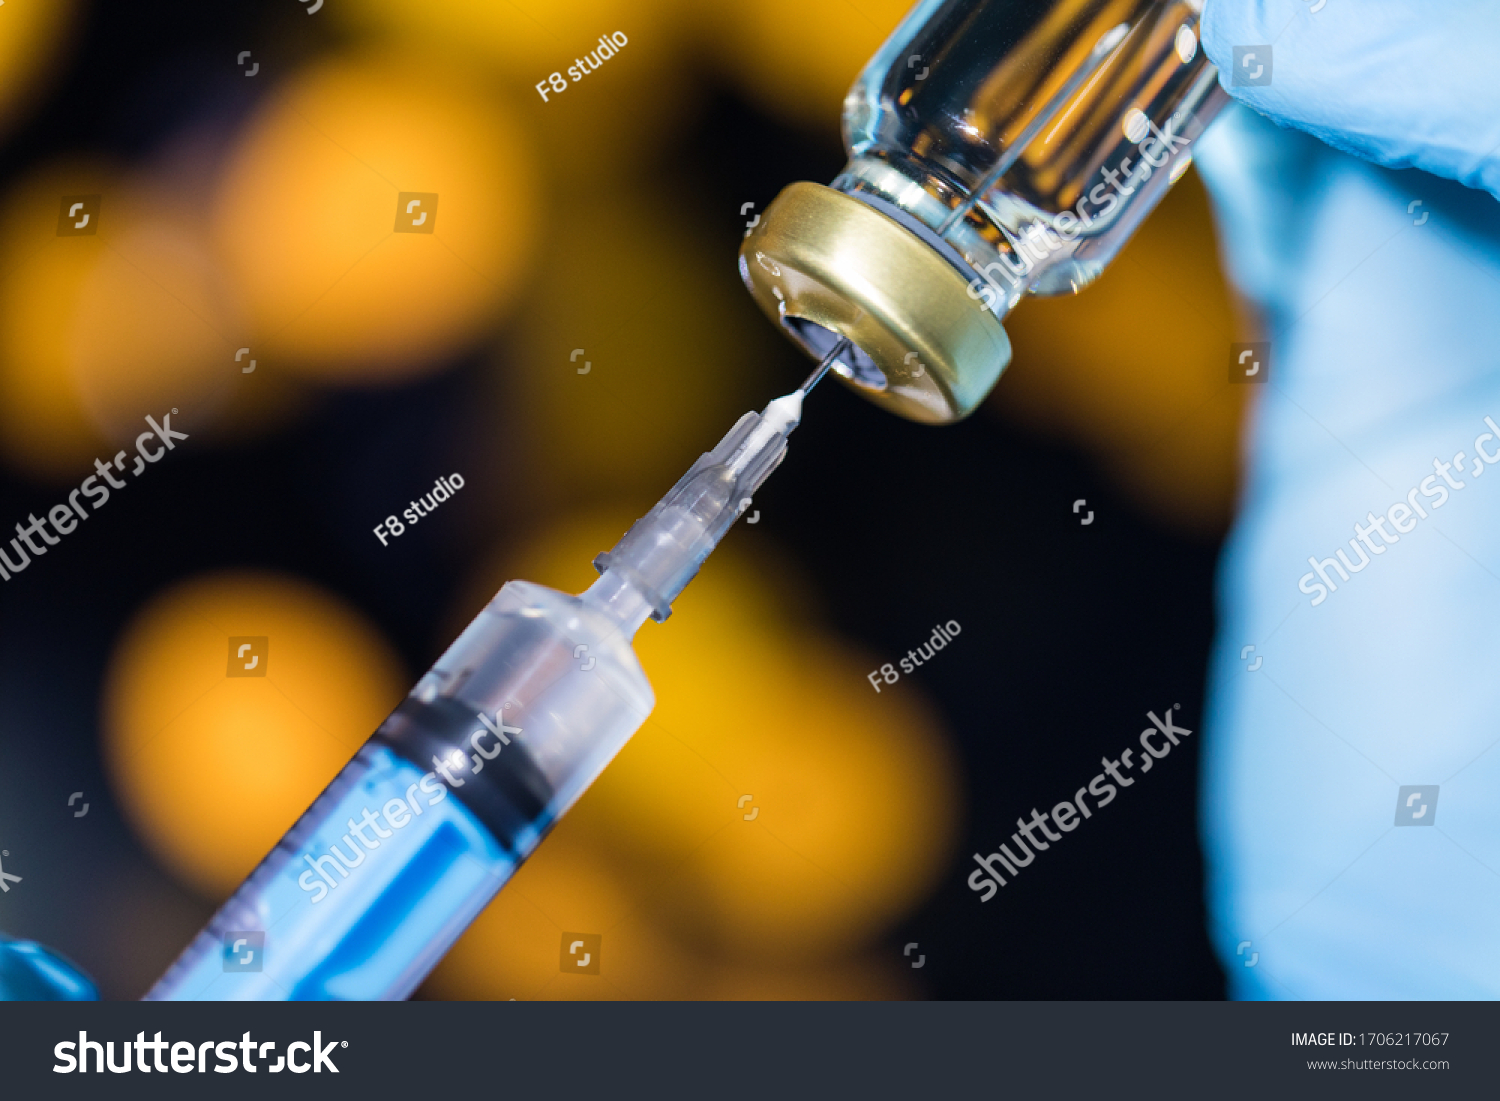 Close up vaccine vial dose flu shot drug needle syringe, medical concept vaccination hypodermic injection treatment, disease care hospital prevention, immunization illness disease isolated background. #1706217067